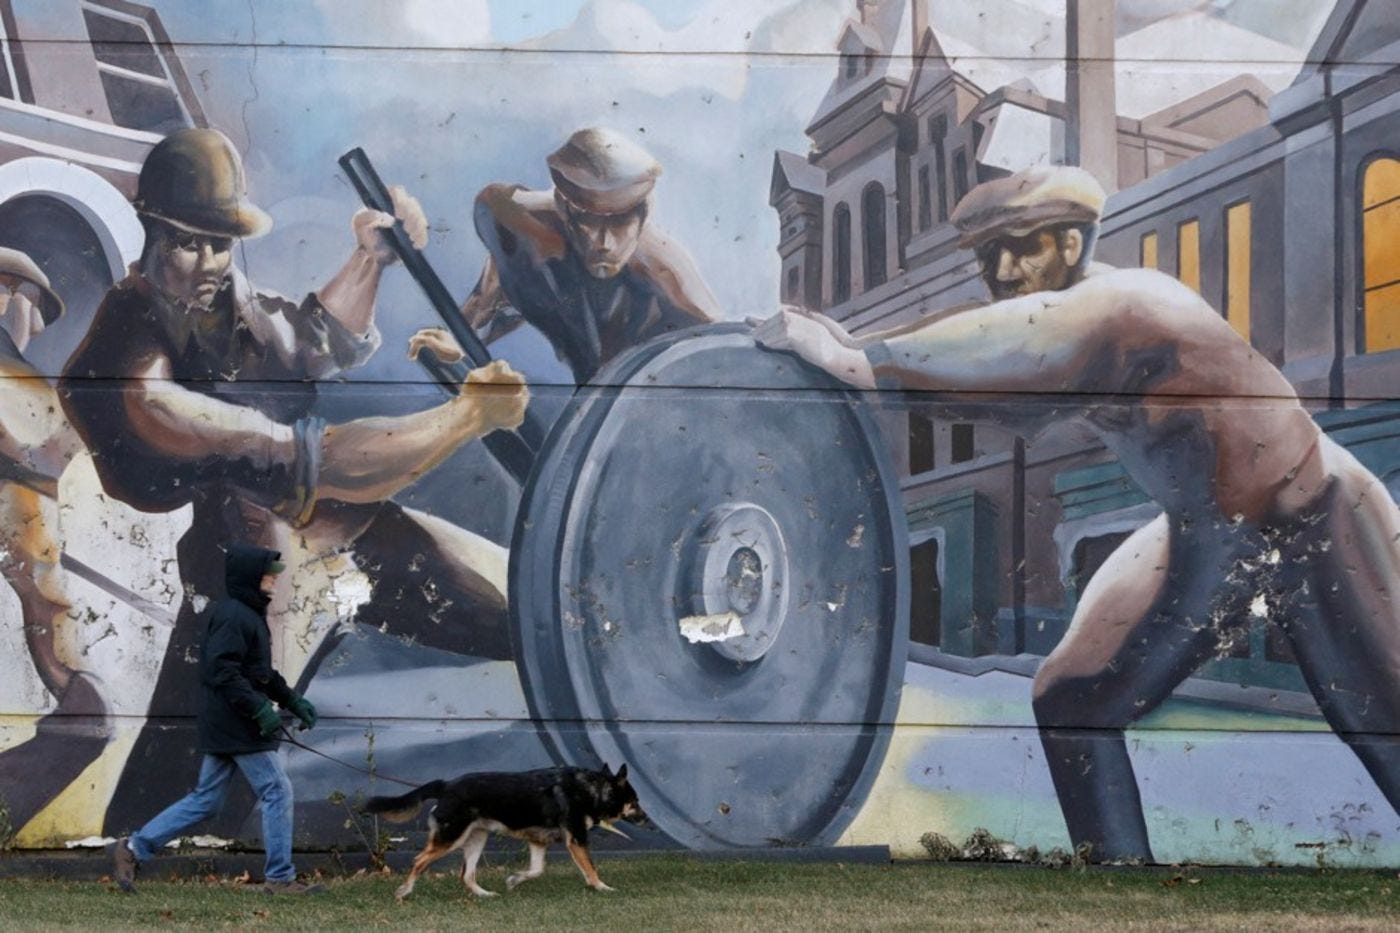 A man walks past a mural of factory workers shoveling coal in Chicago's historic Pullman neighborhood. The Pullman porters, who were paid less than white workers in the town, organized the first African American union.